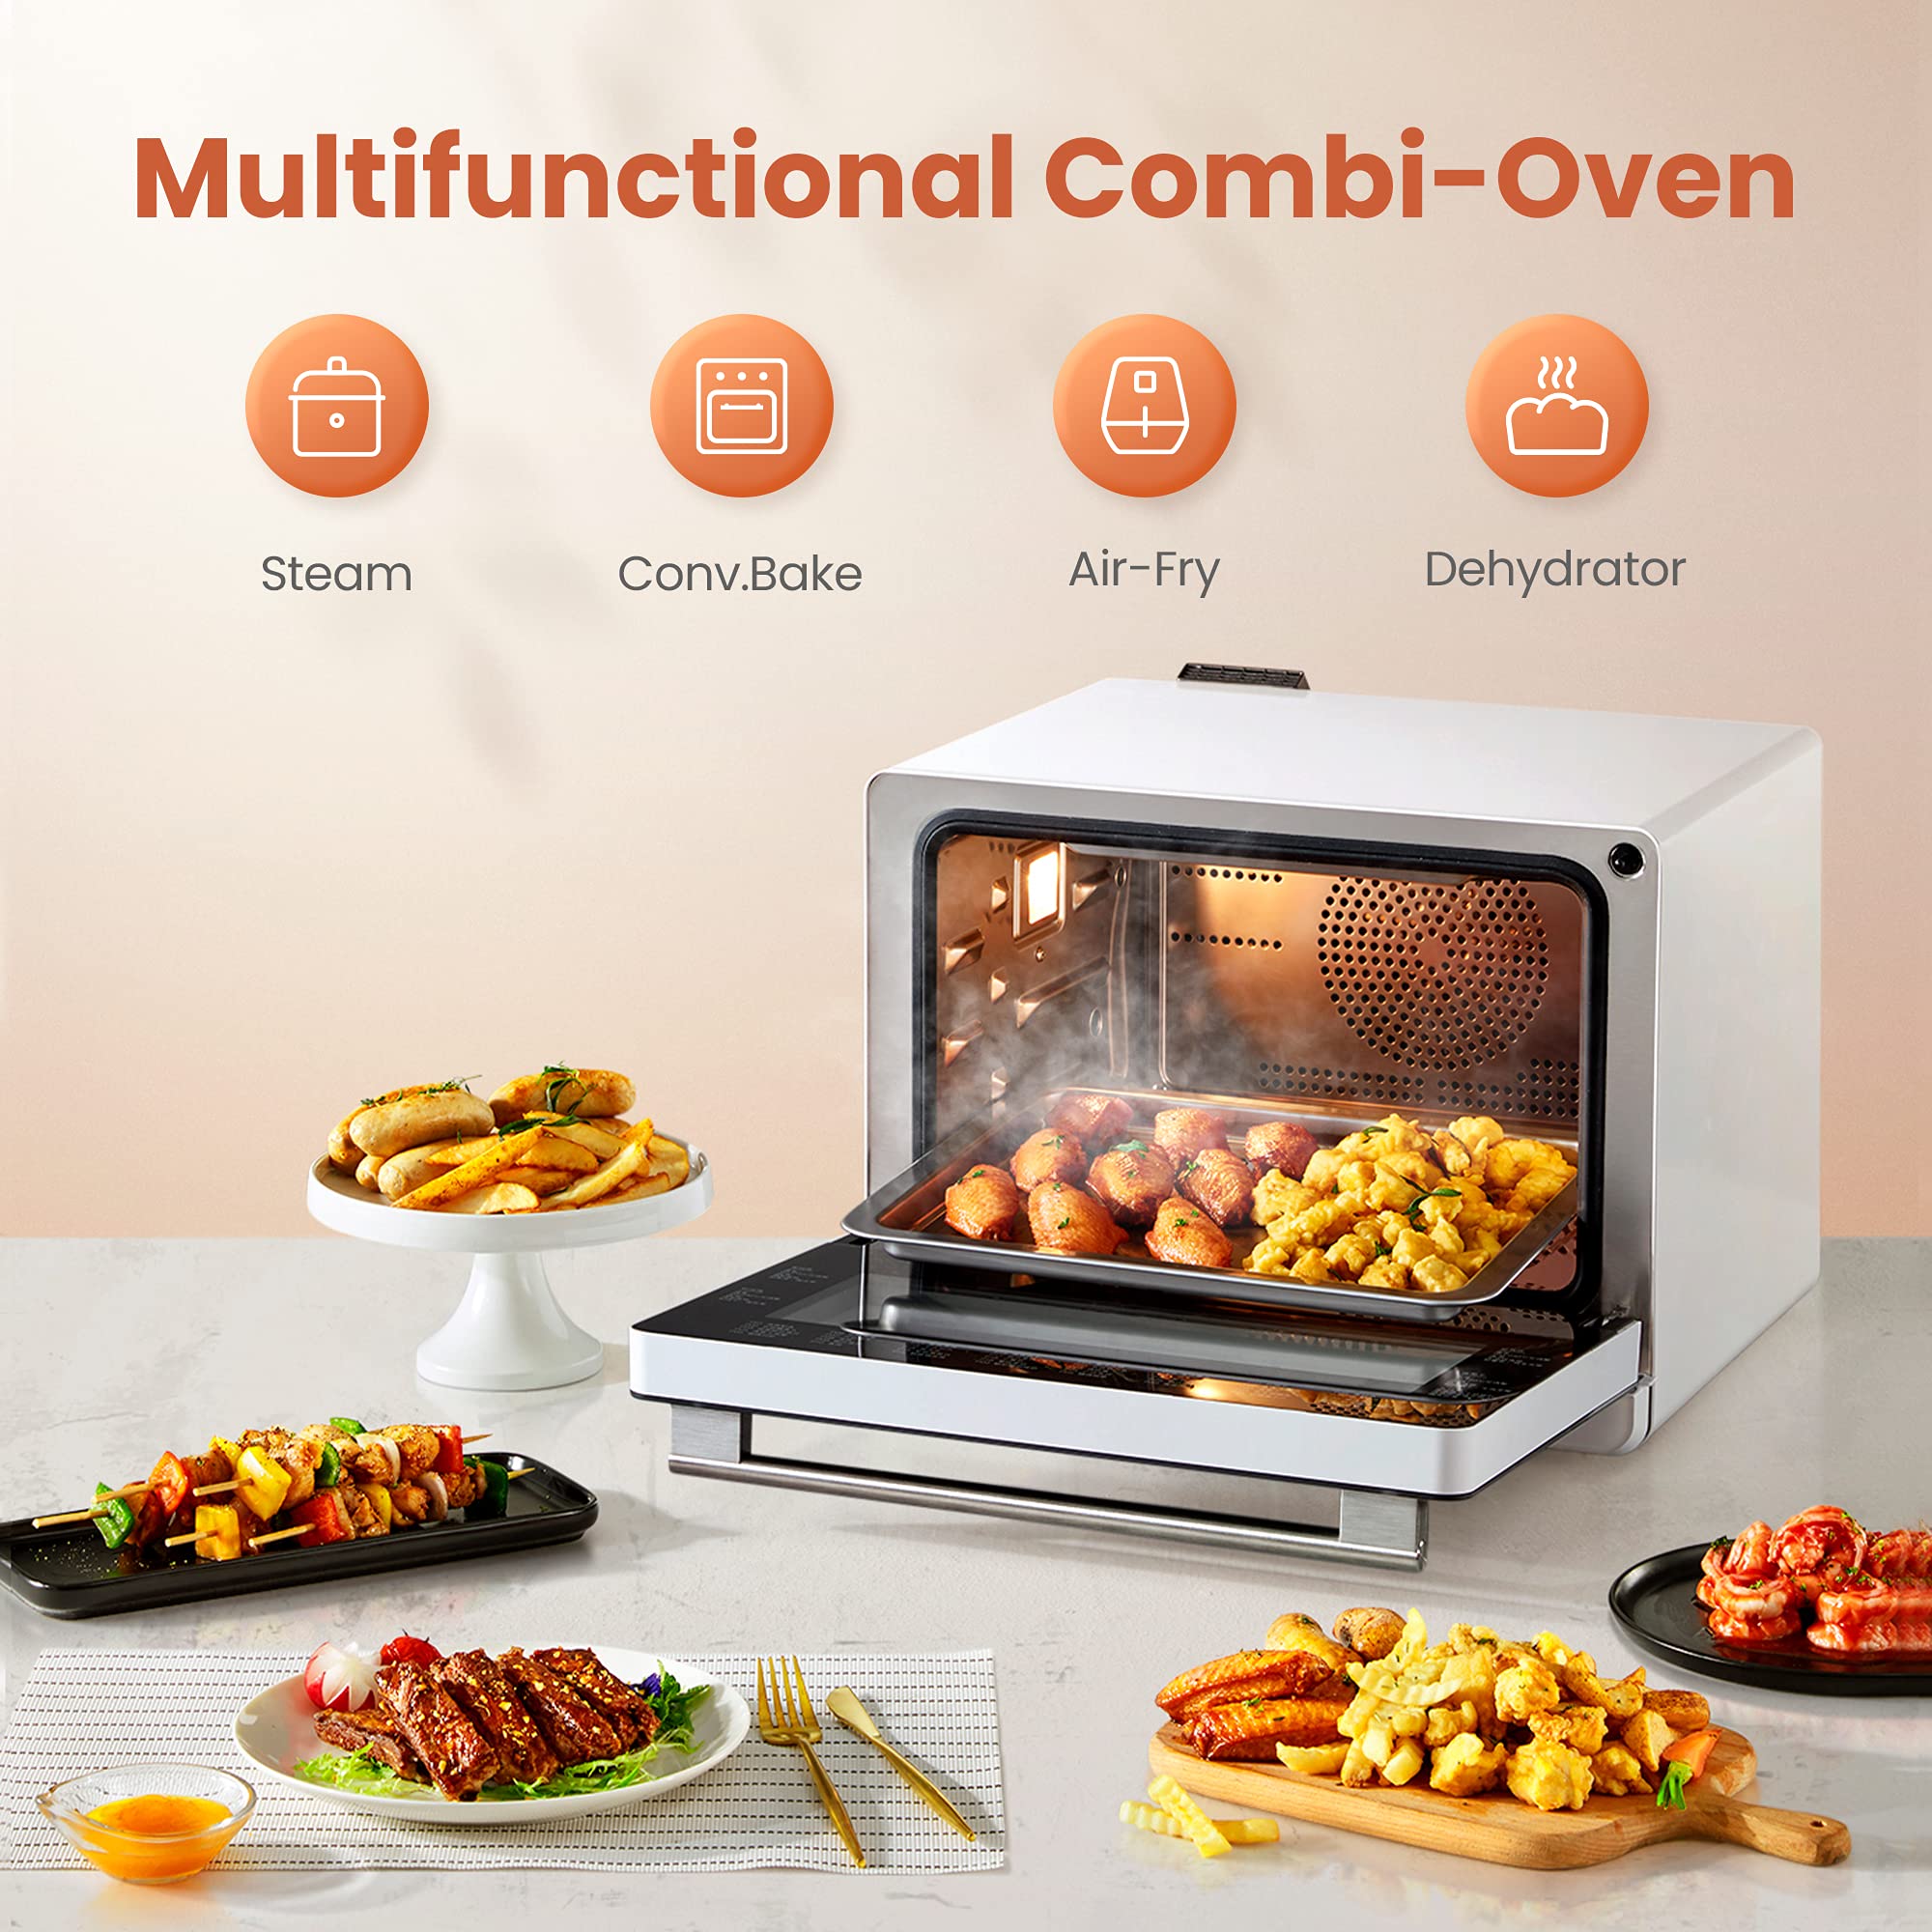 FOTILE ChefCubii 4-in-1 Countertop Convection Steam Combi Oven Air Fryer Dehydrator with Temperature Control, 40 Preset Menu and Steam Self-Clean, 1 CFT